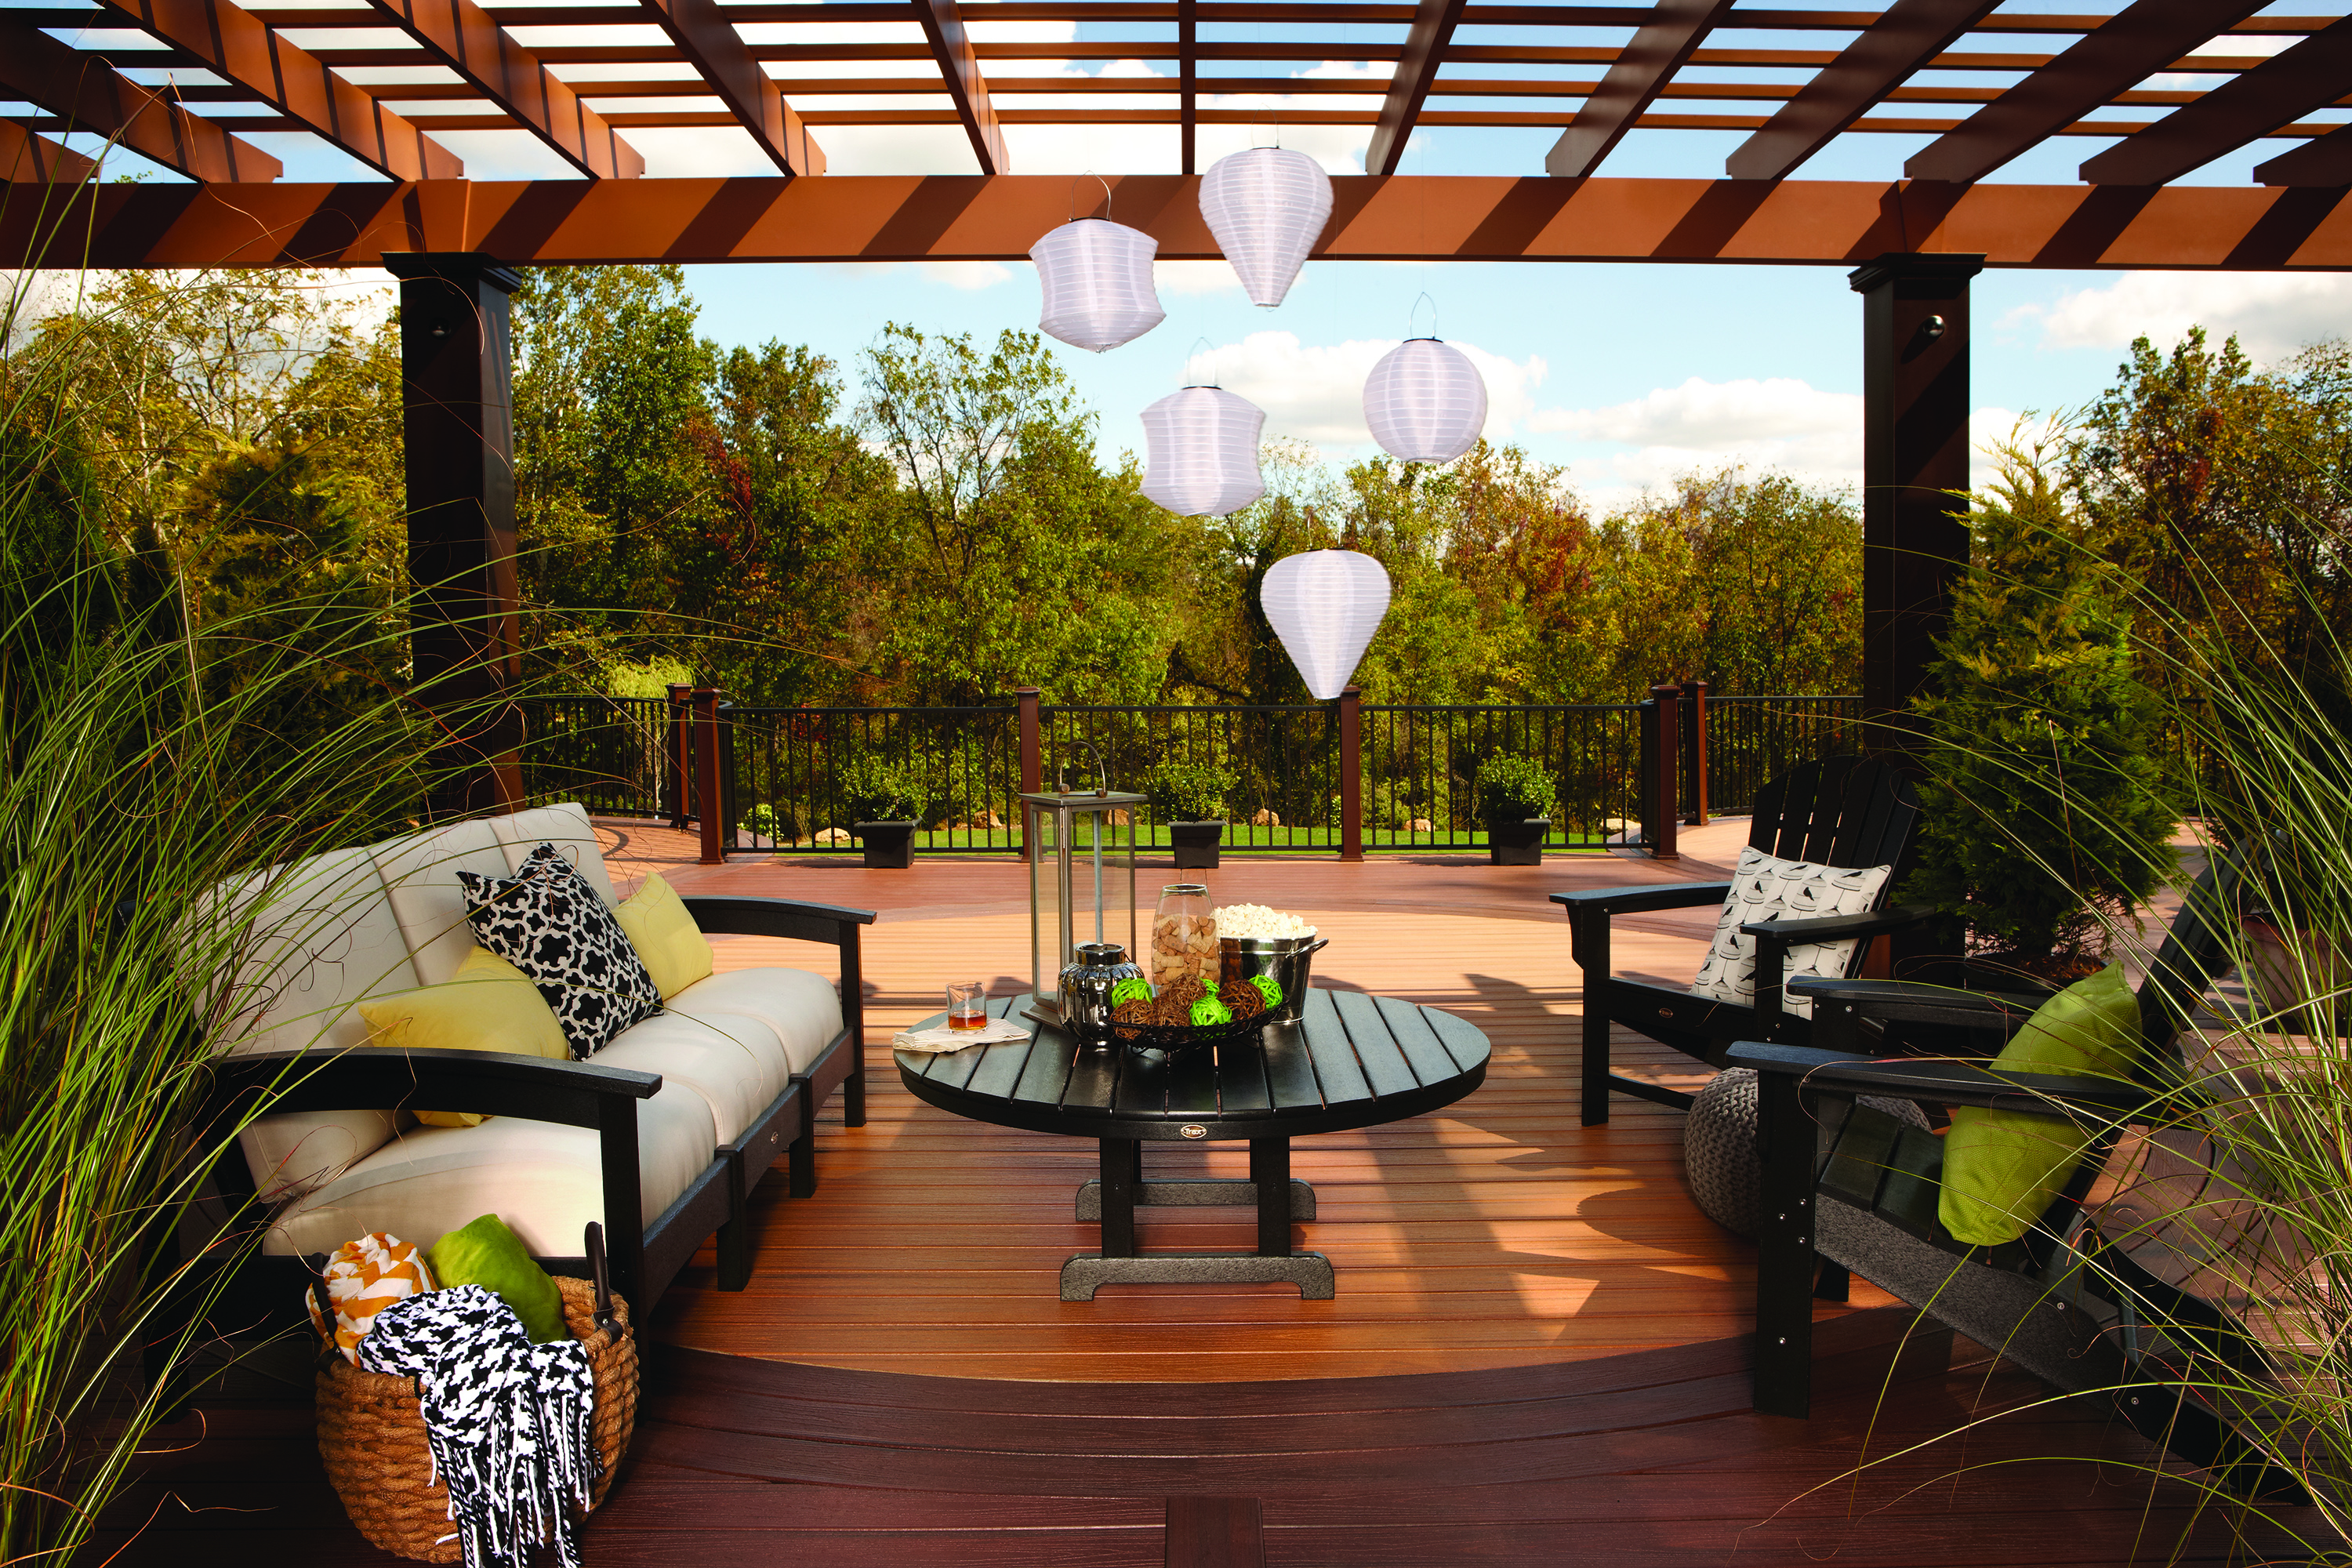 Decking companies such as Trex are becoming more outdoor-living focused by provi